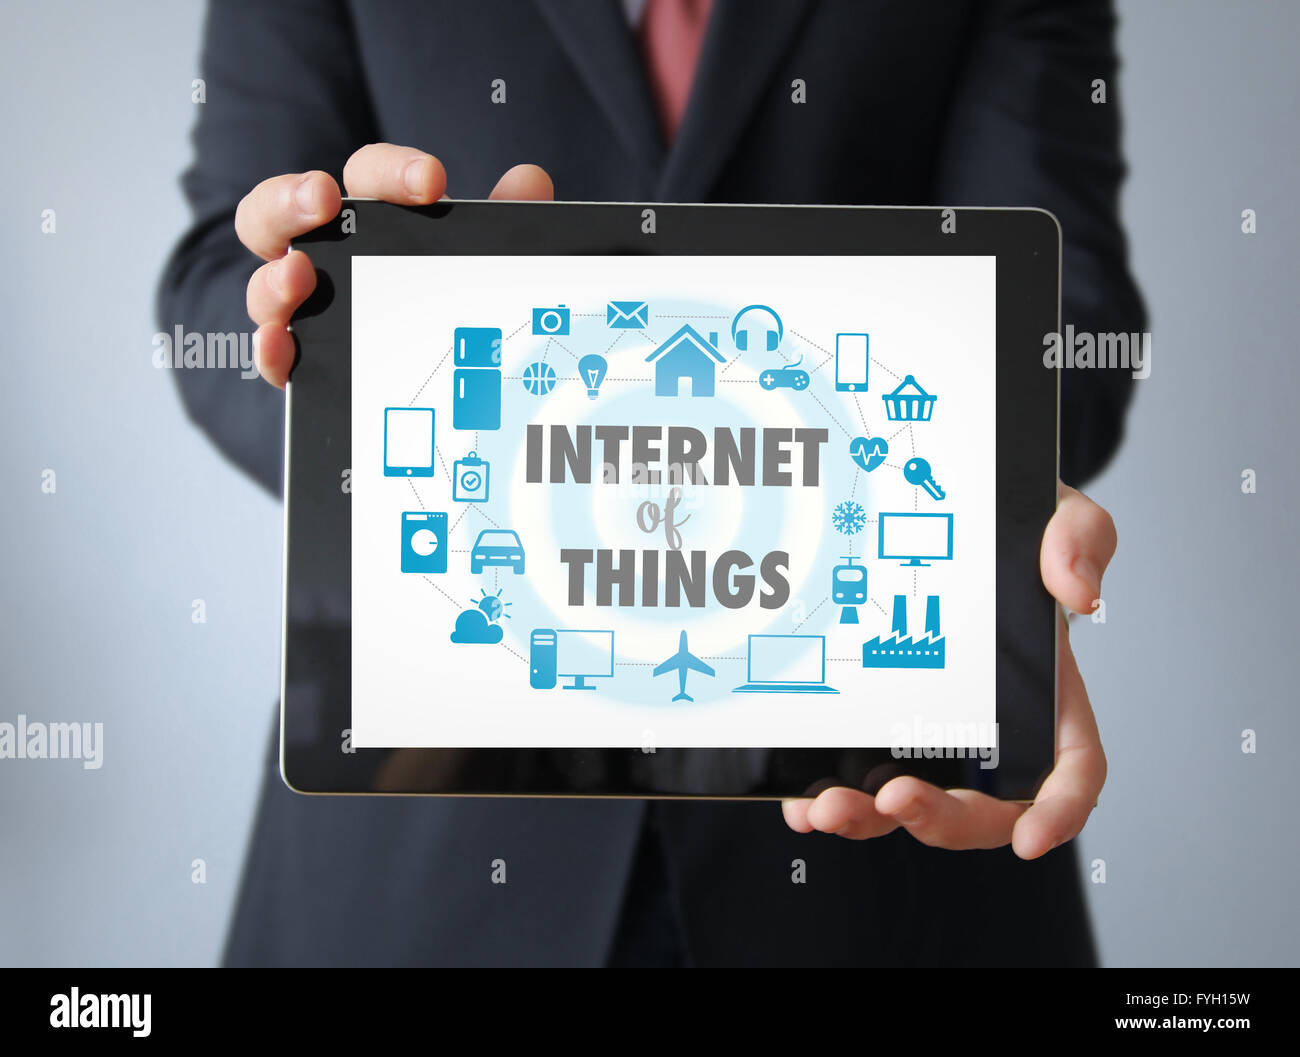 Technology Concept: Businessman with internet of things graphic on the screen. All graphics are made up. Stock Photo